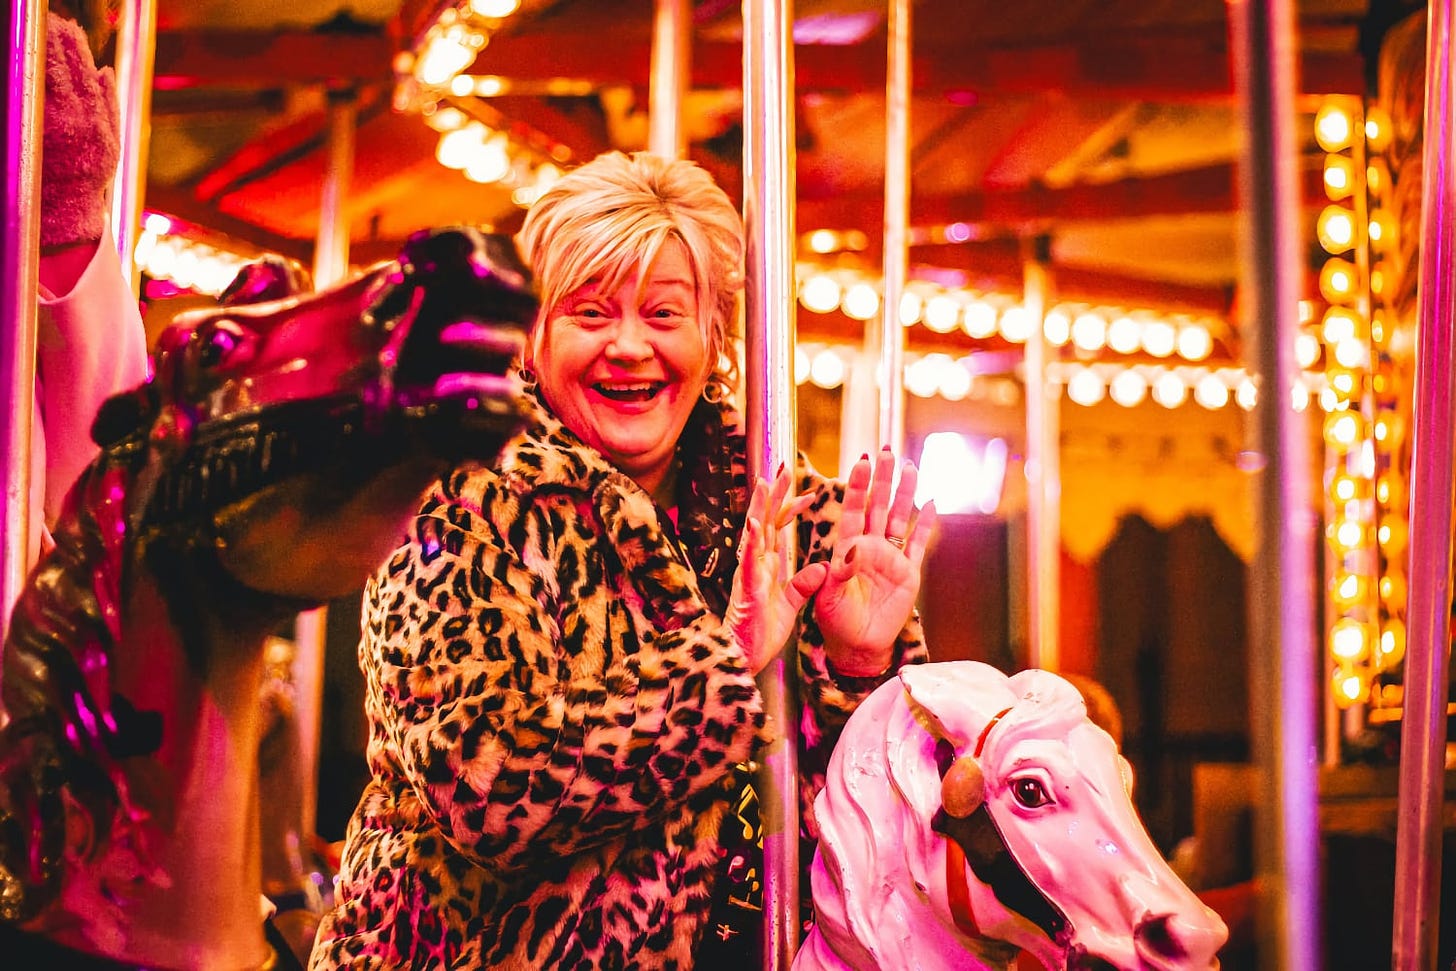 A joyful woman with short hair, wearing a leopard print jacket, is smiling broadly and waving towards the camera. She is on a carousel at a fair, surrounded by lights that create a warm, vibrant atmosphere. A white carousel horse with pink highlights and a golden mane is in the foreground, with the pole structure of the carousel providing a bright, festive background. Her expression and the setting evoke a sense of fun and nostalgia.